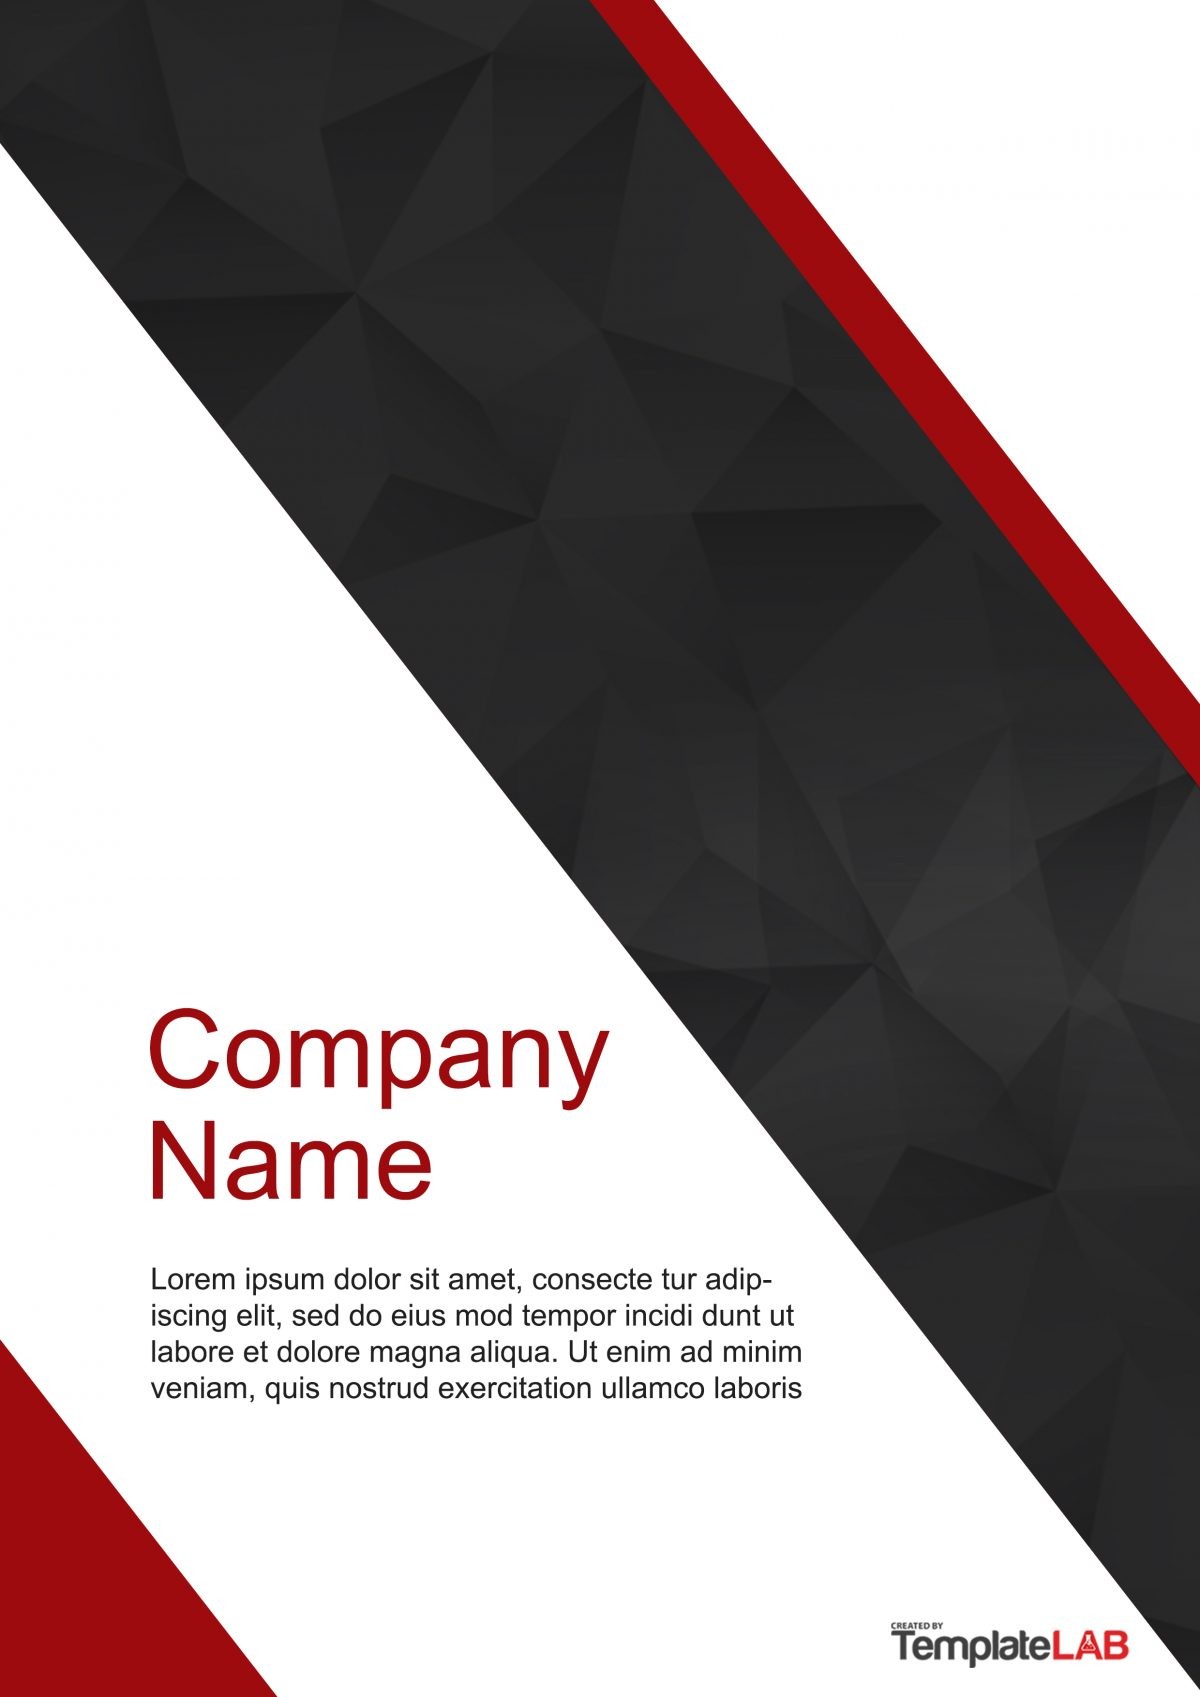 39 Amazing Cover Page Templates Word PSD TemplateLab